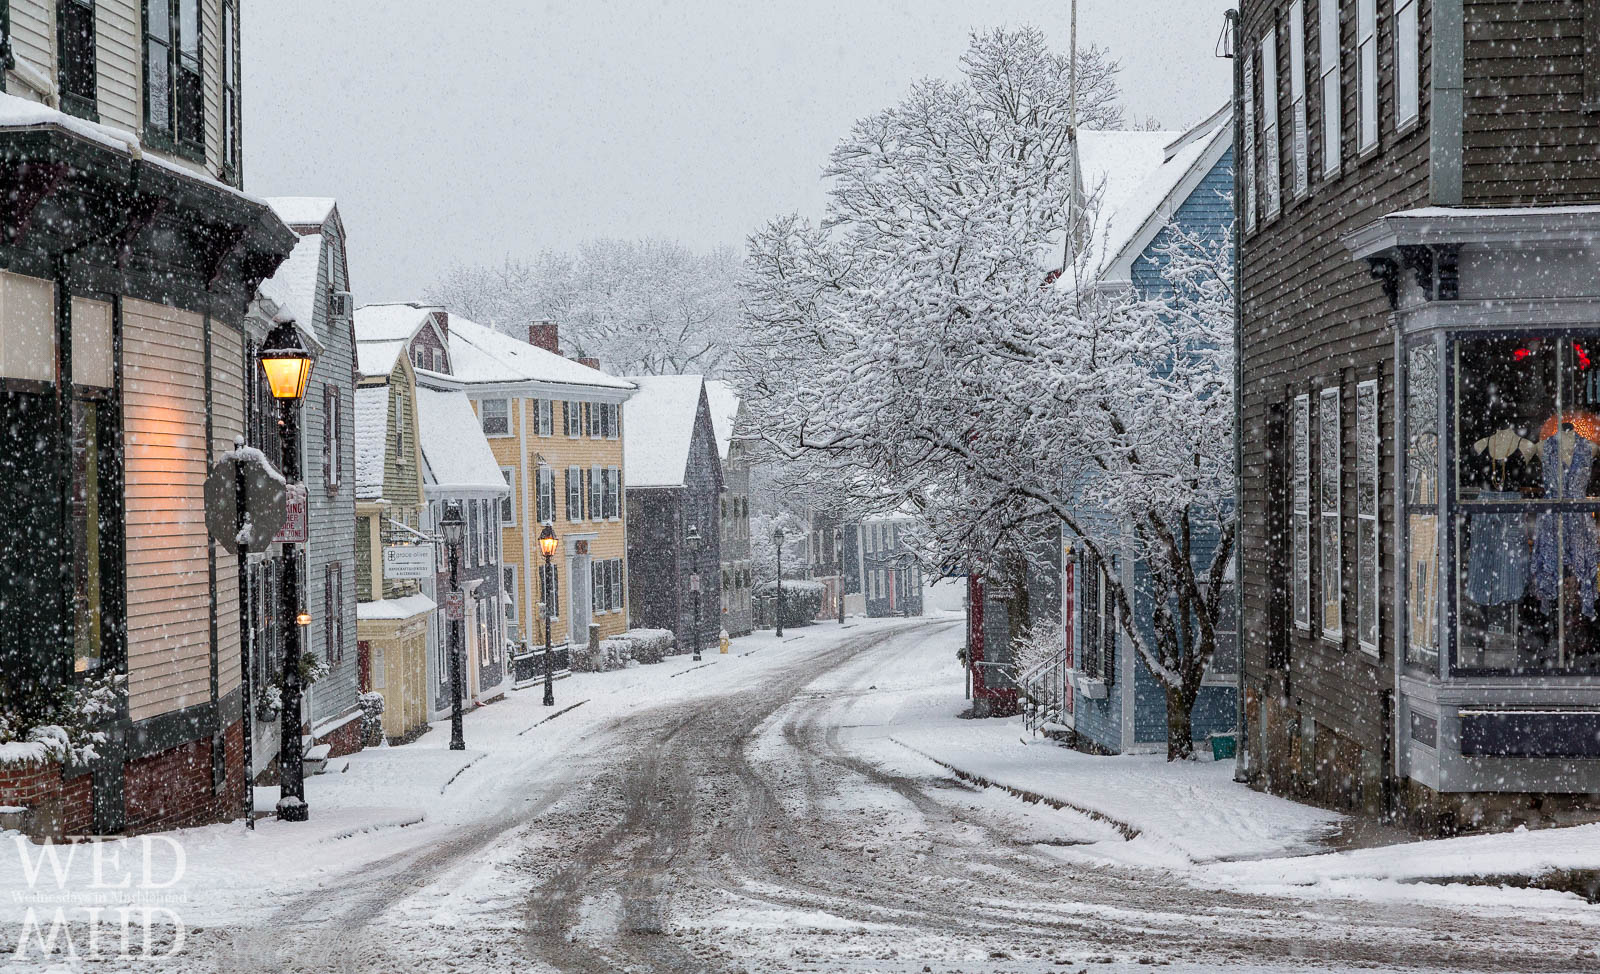 Falling snow turns State Street into a Winter wonderland